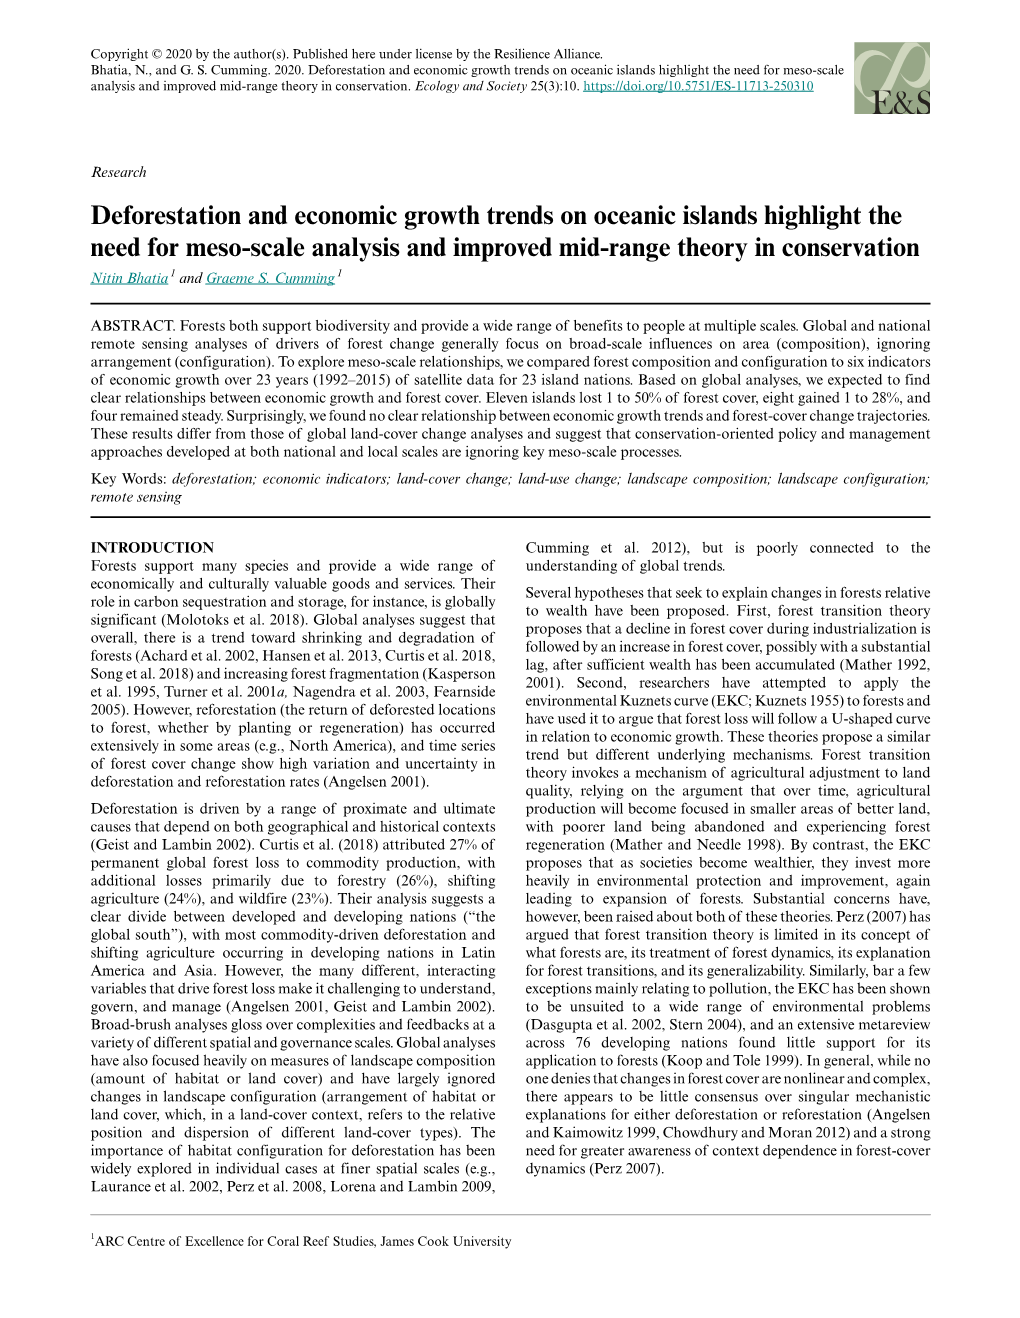 Deforestation and Economic Growth Trends on Oceanic Islands Highlight the Need for Meso-Scale Analysis and Improved Mid-Range Theory in Conservation